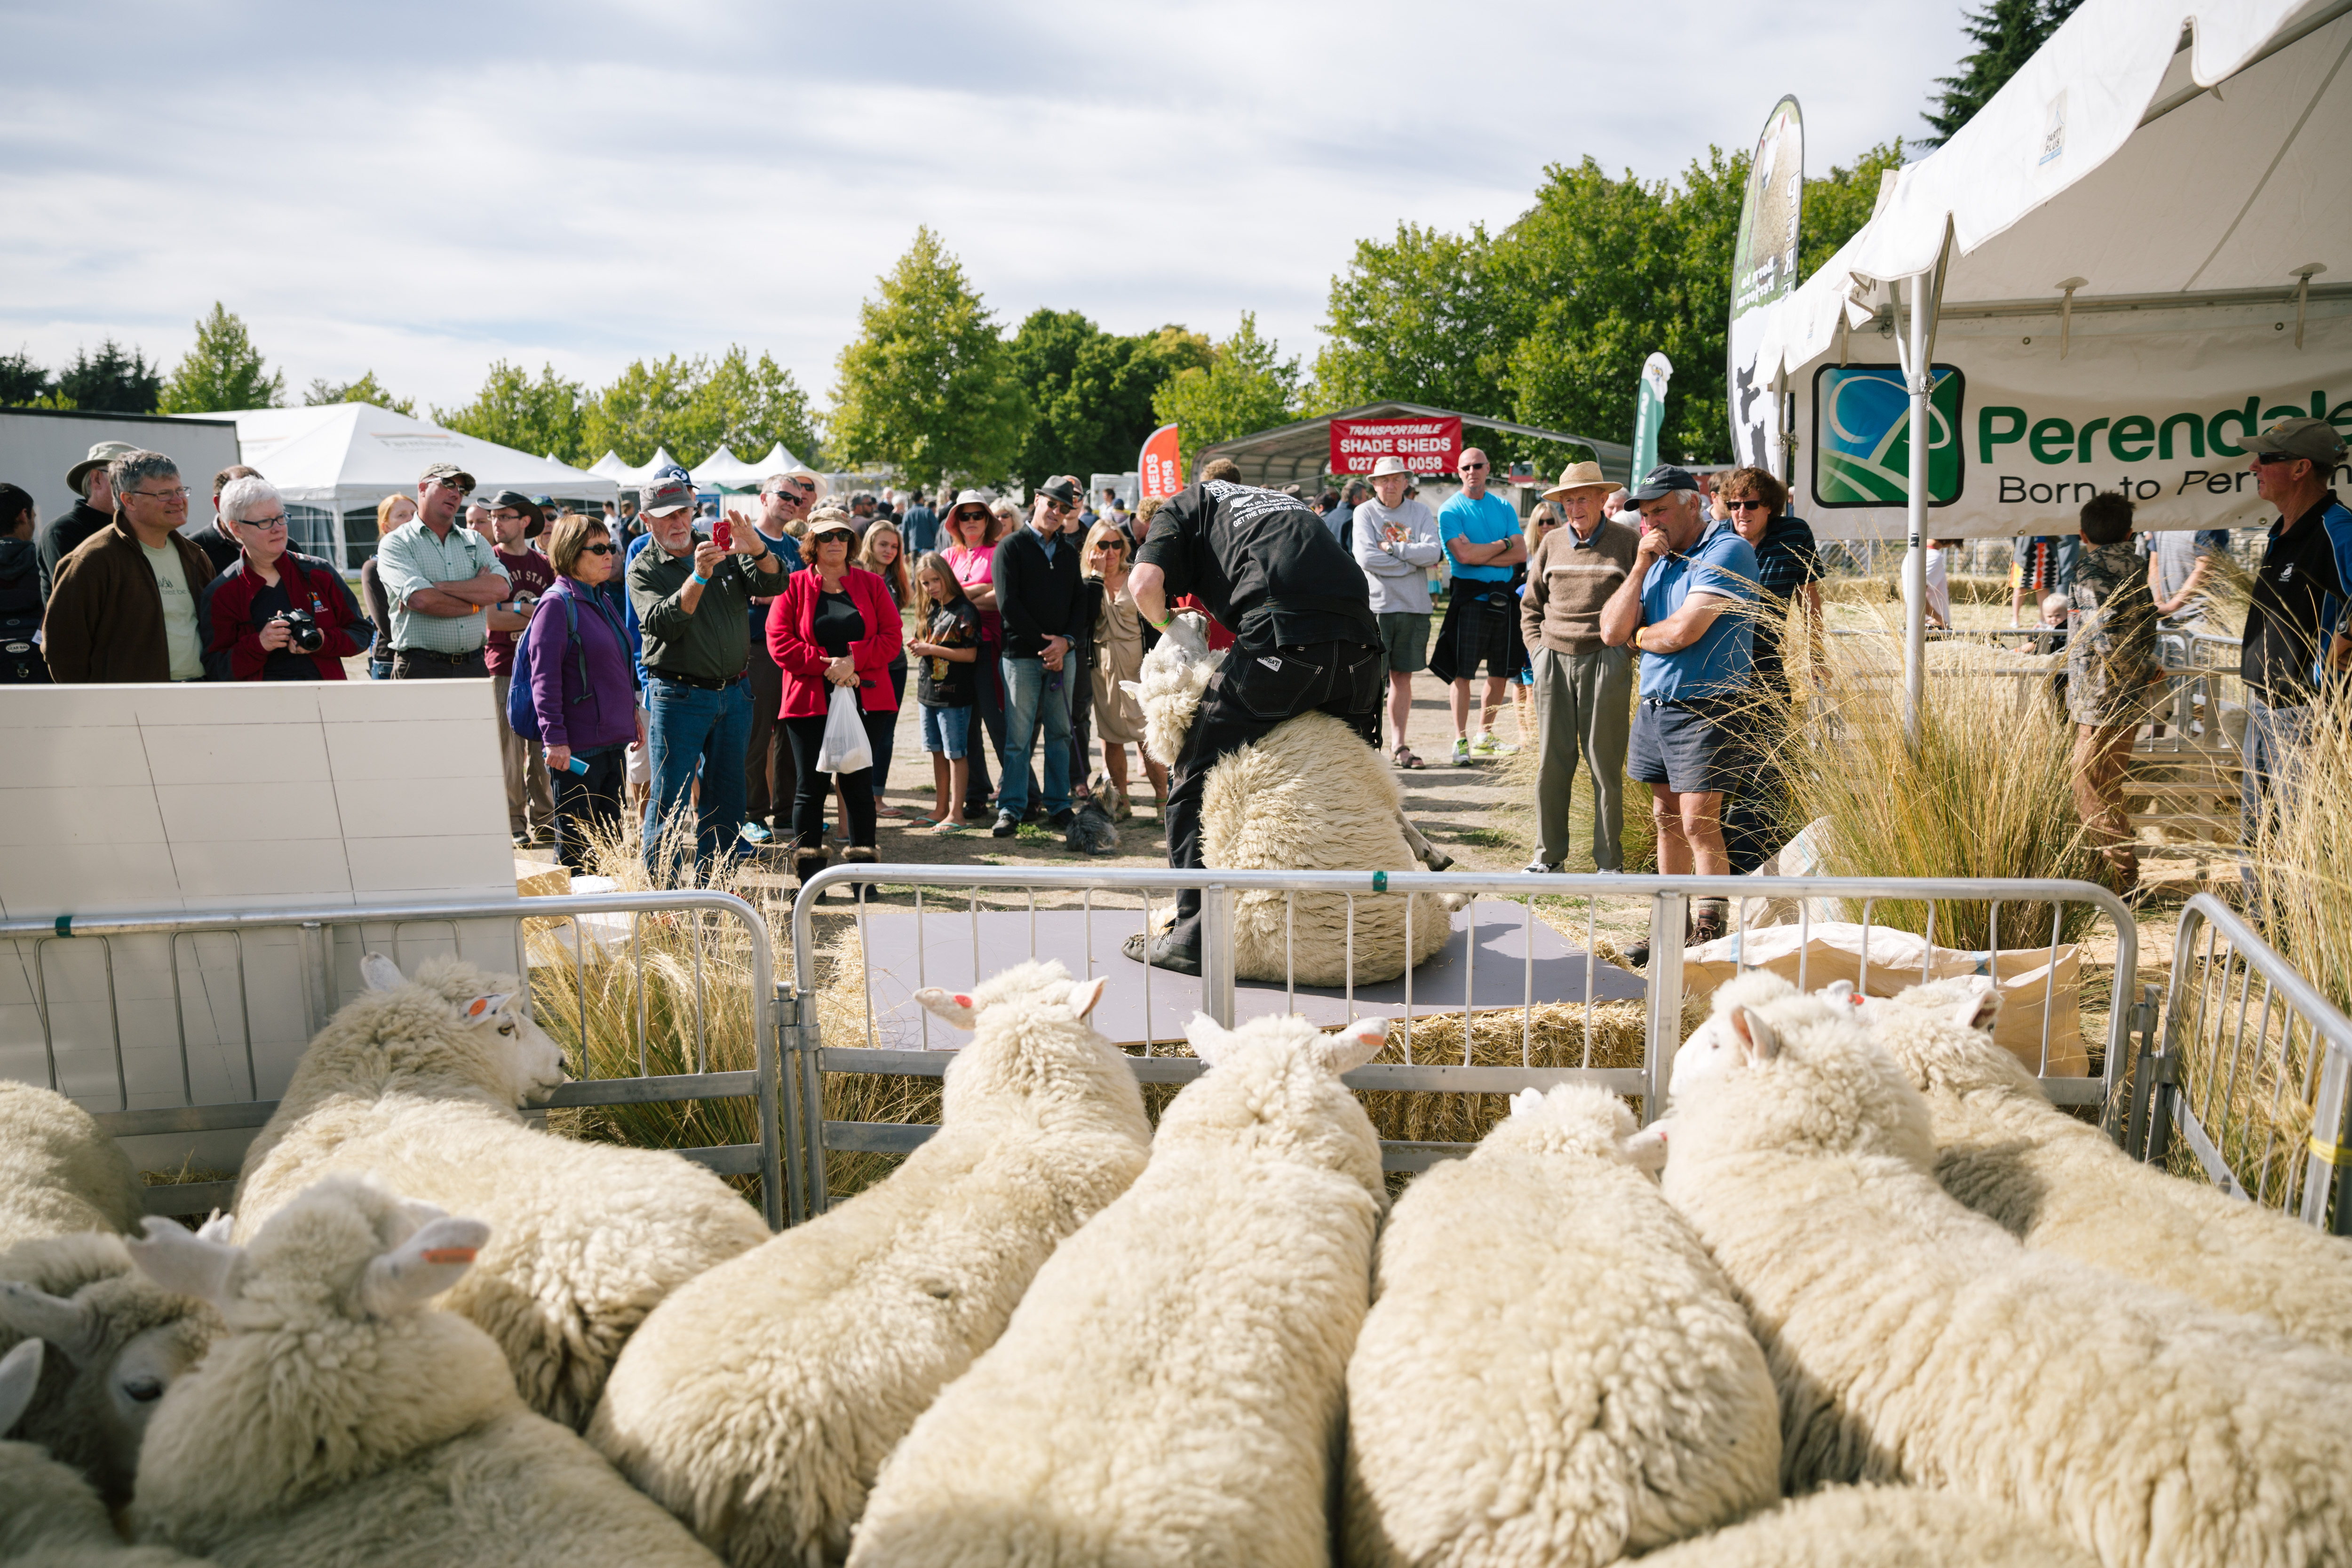 Huge crowds exceed expectations at Wanaka Show